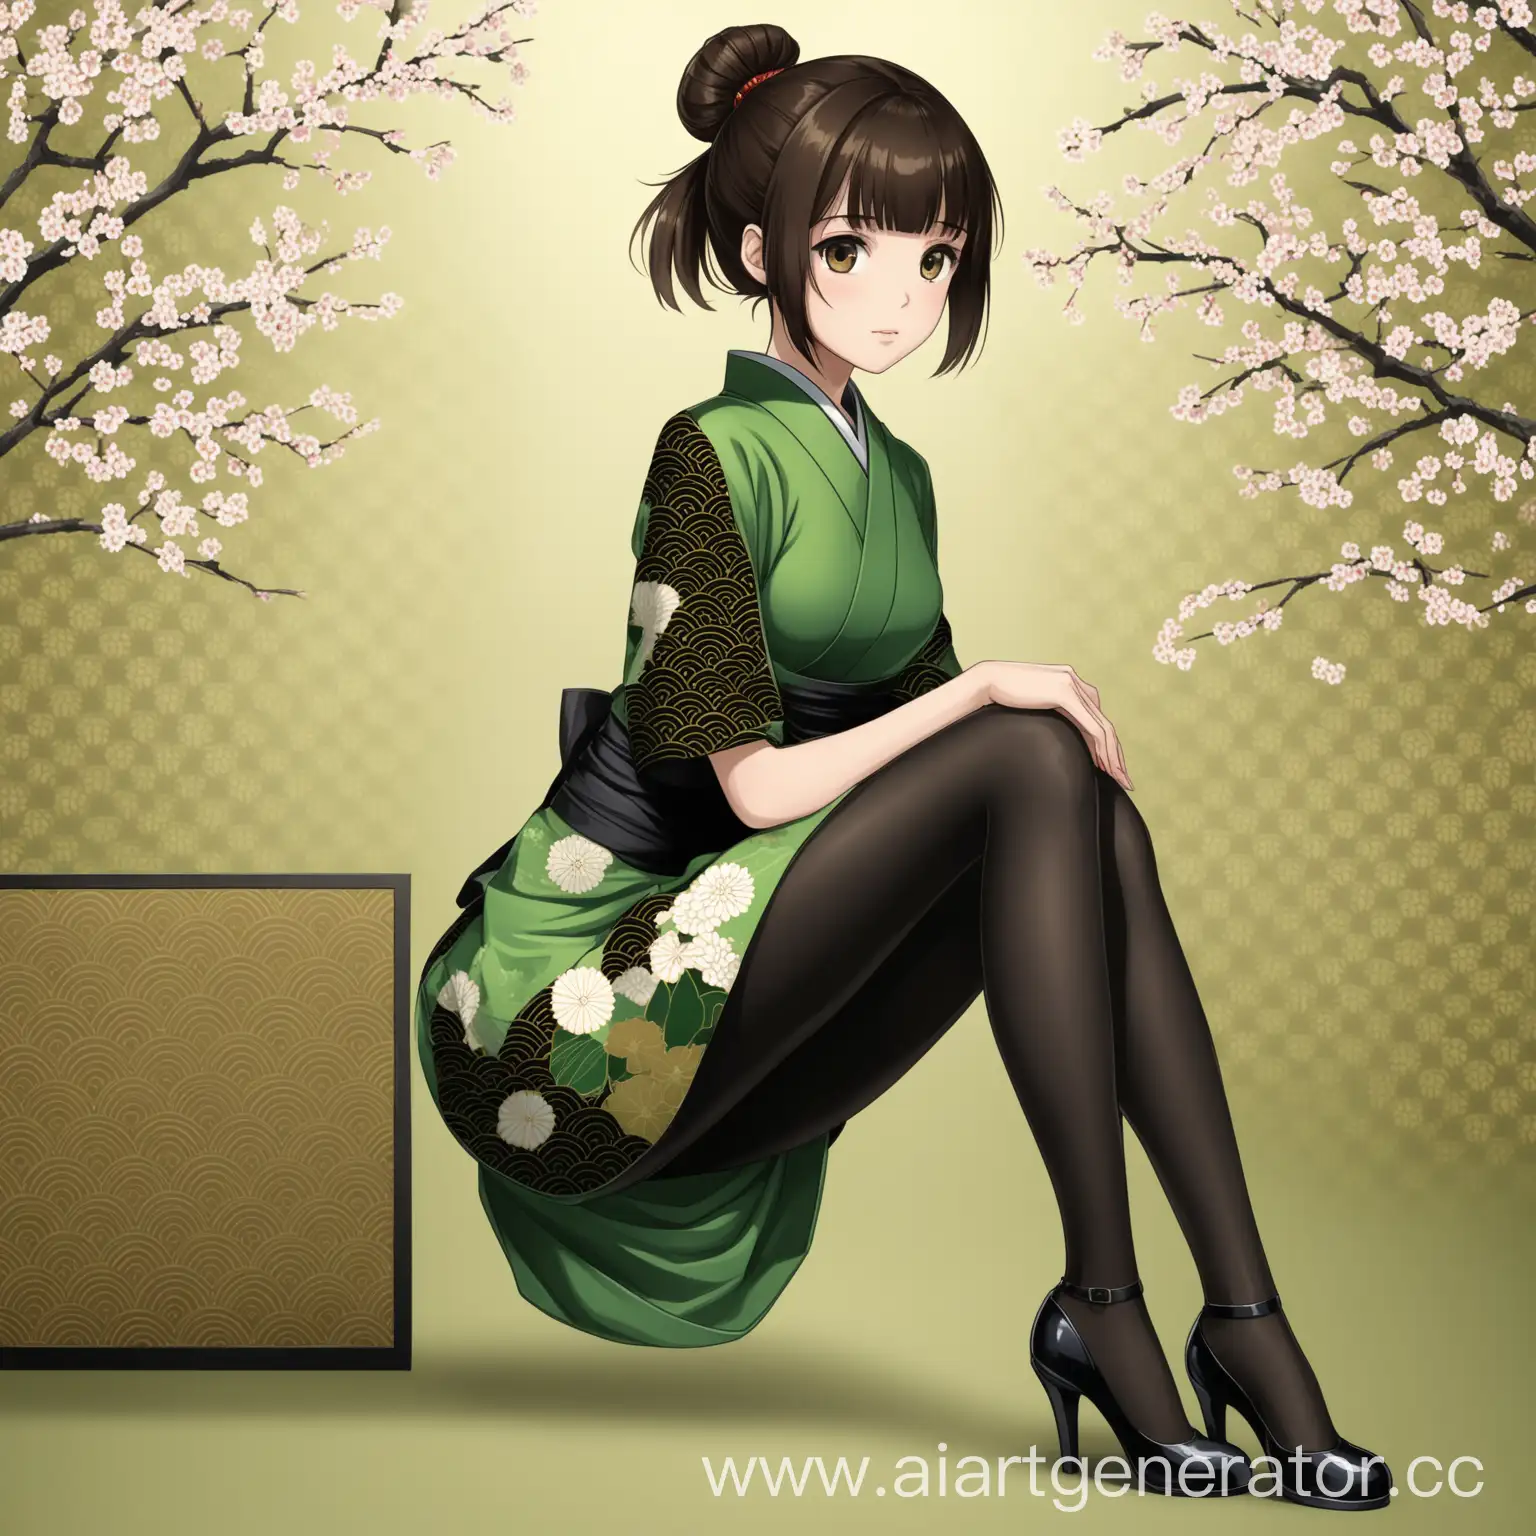 Brunette-Girl-in-Green-Dress-with-Japanese-Pattern-and-Black-Highheeled-Shoes